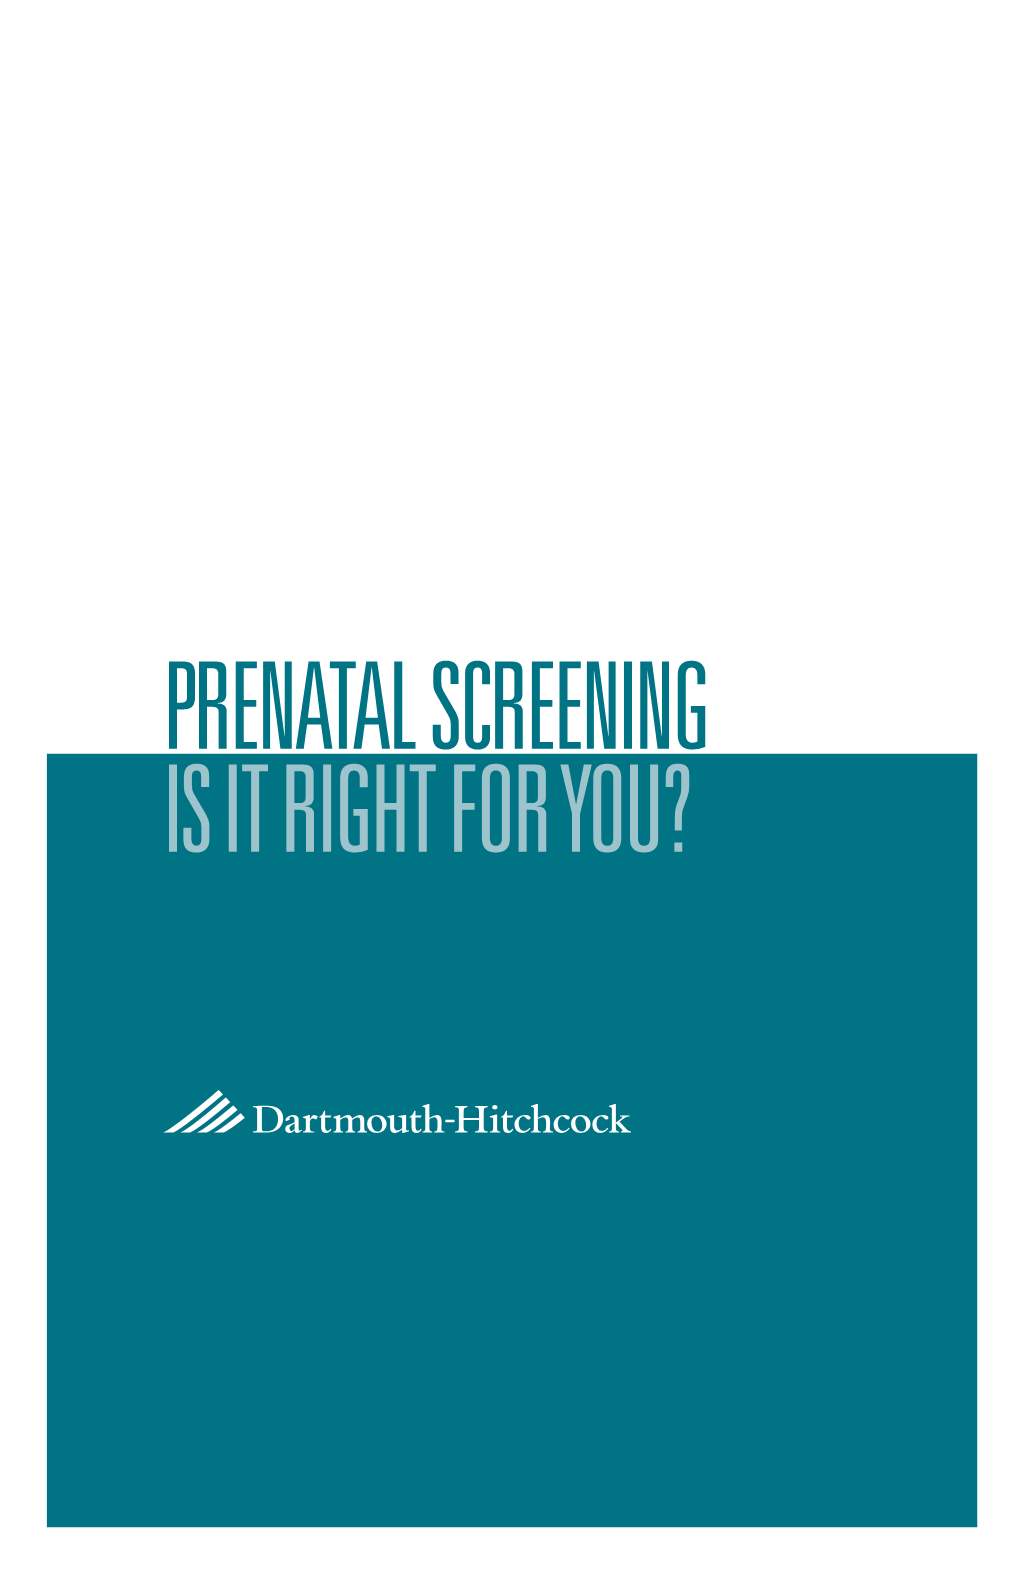 Prenatal Screening: Is It Right for You?